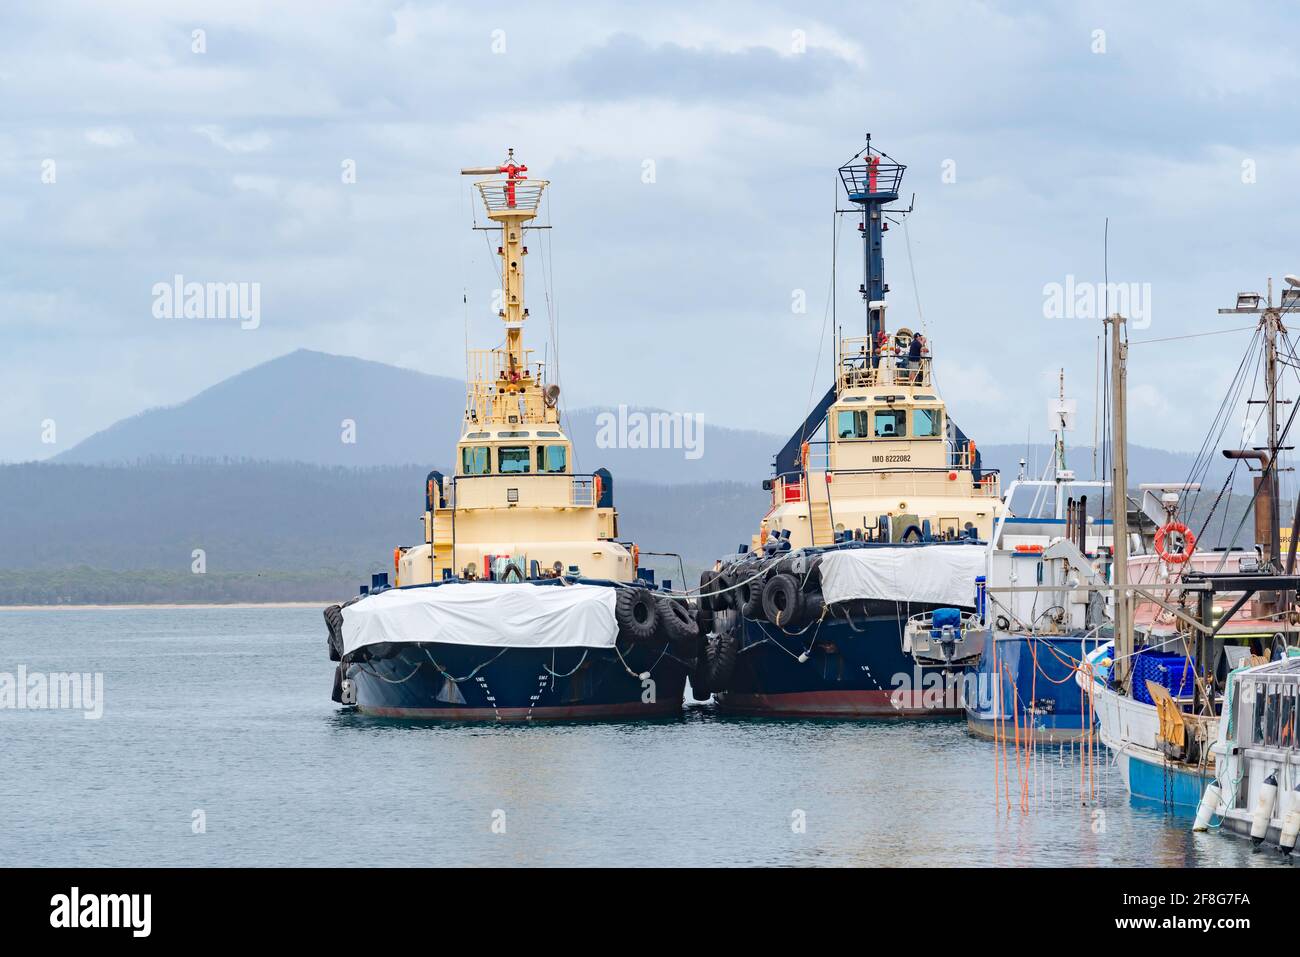 Large pusher tugs Wistari (Left) and Cooma moored with other commercial and fishing vessels at Port of Eden on the NSW south coast of Australia Stock Photo